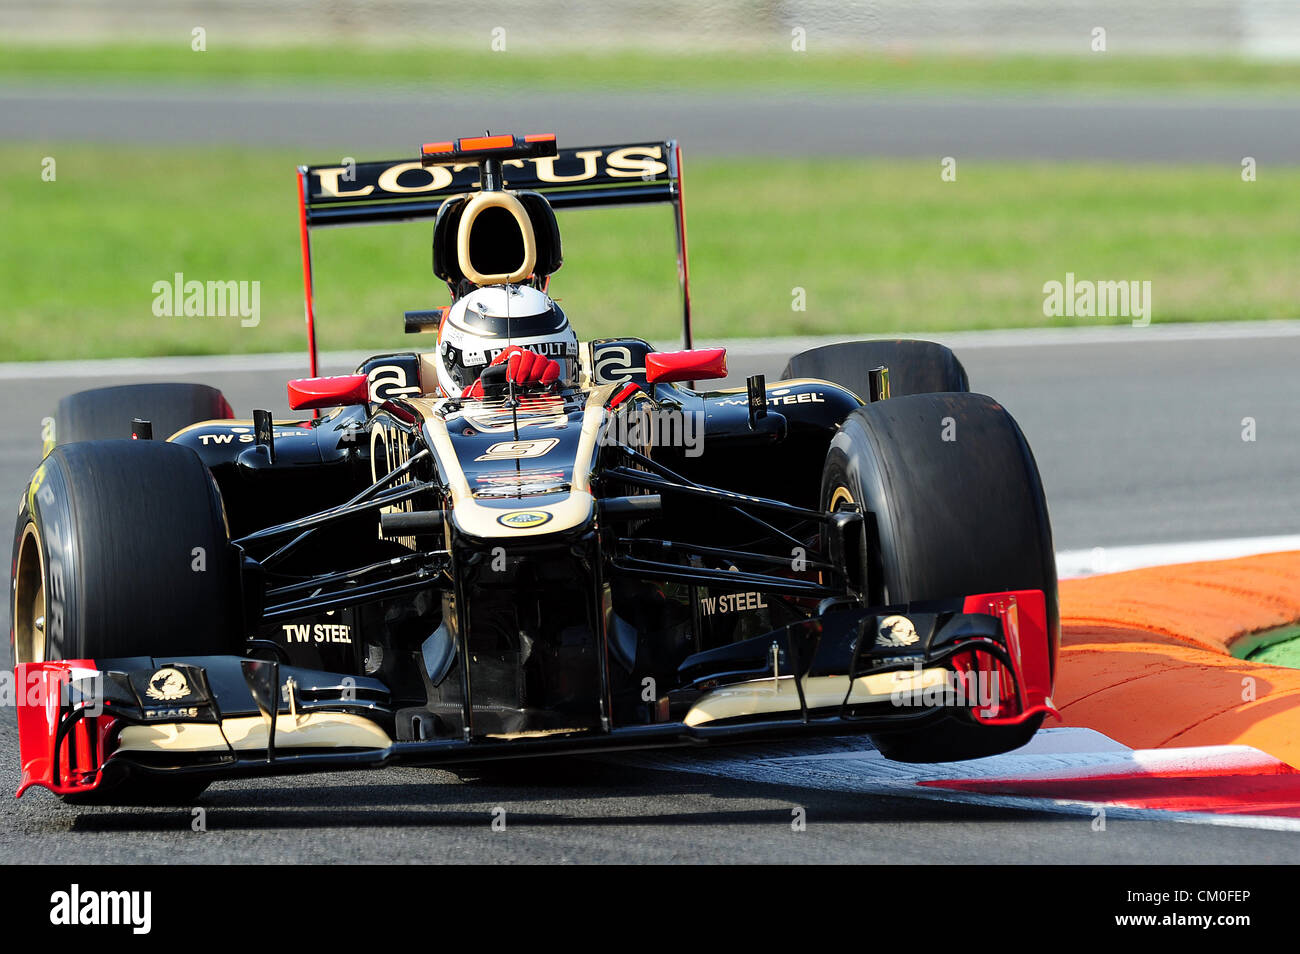 Monza, Italy. 8th September 2012. Kimi Raikkonen of Lotus in action during Qualification Day  of the GP of Italy 2012. Stock Photo